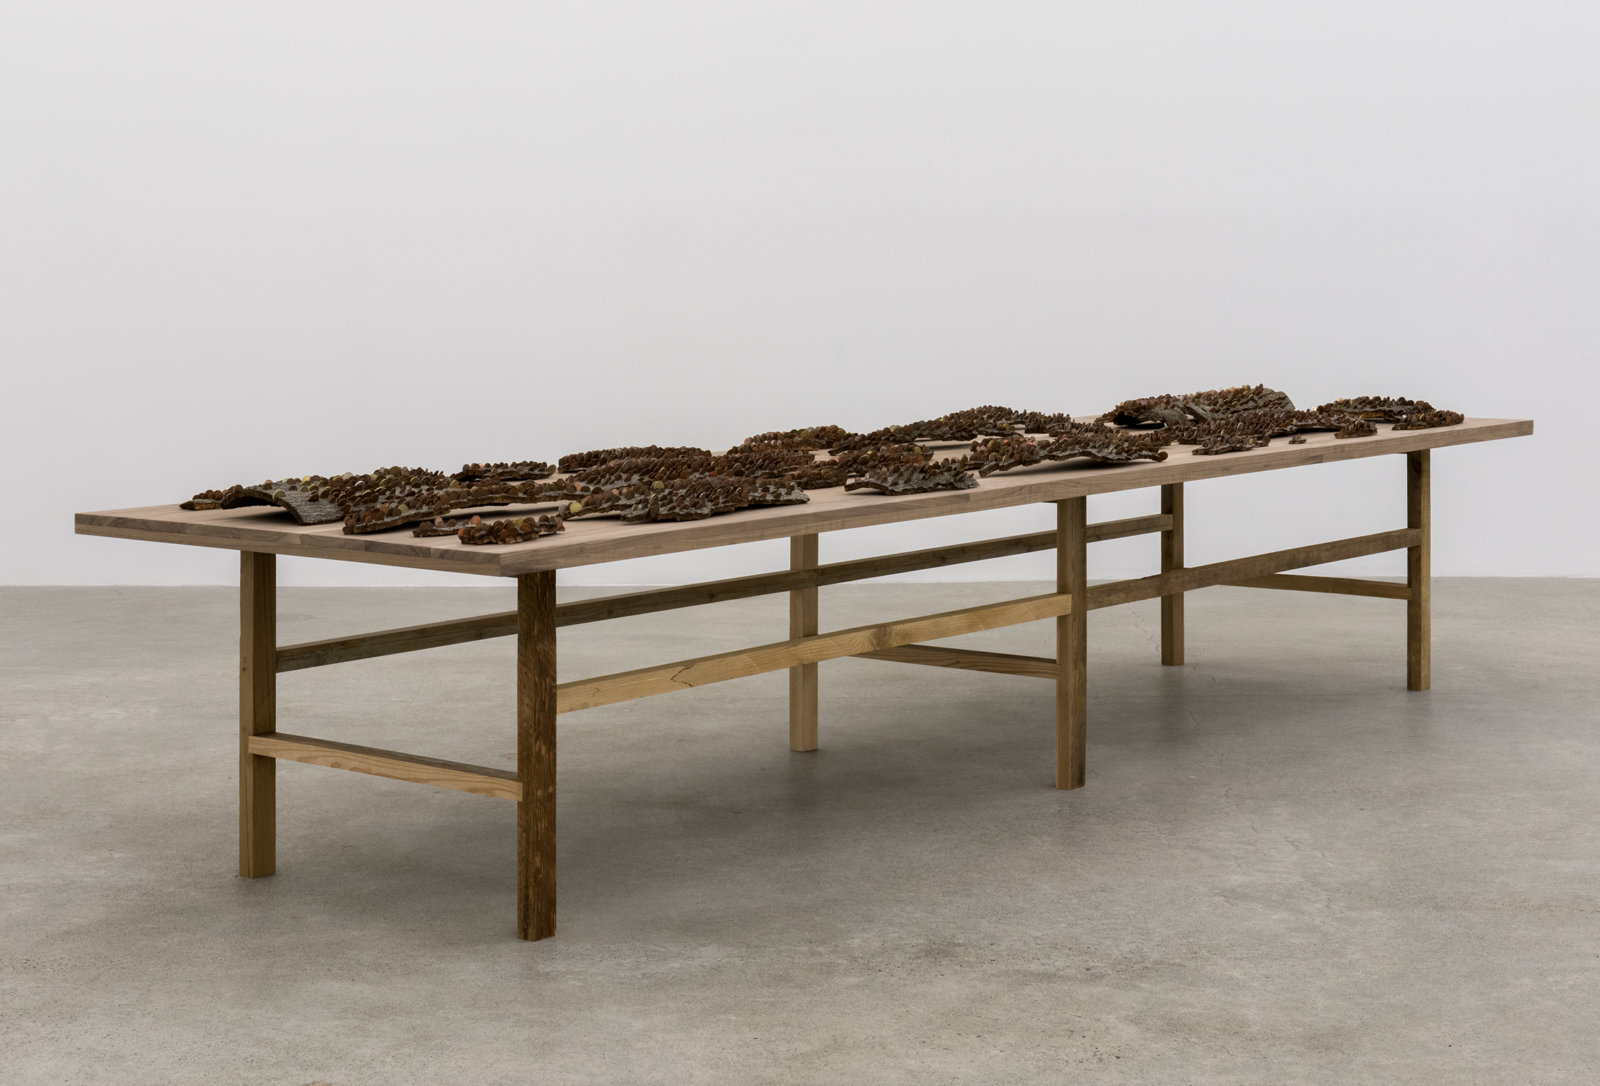 Ashes Withyman, Entrance Fee from a place, near the buried canal, 2012–2016, 43 pieces of bark with various currency, wood table, 27 x 45 x 136 in. (69 x 114 x 346 cm)